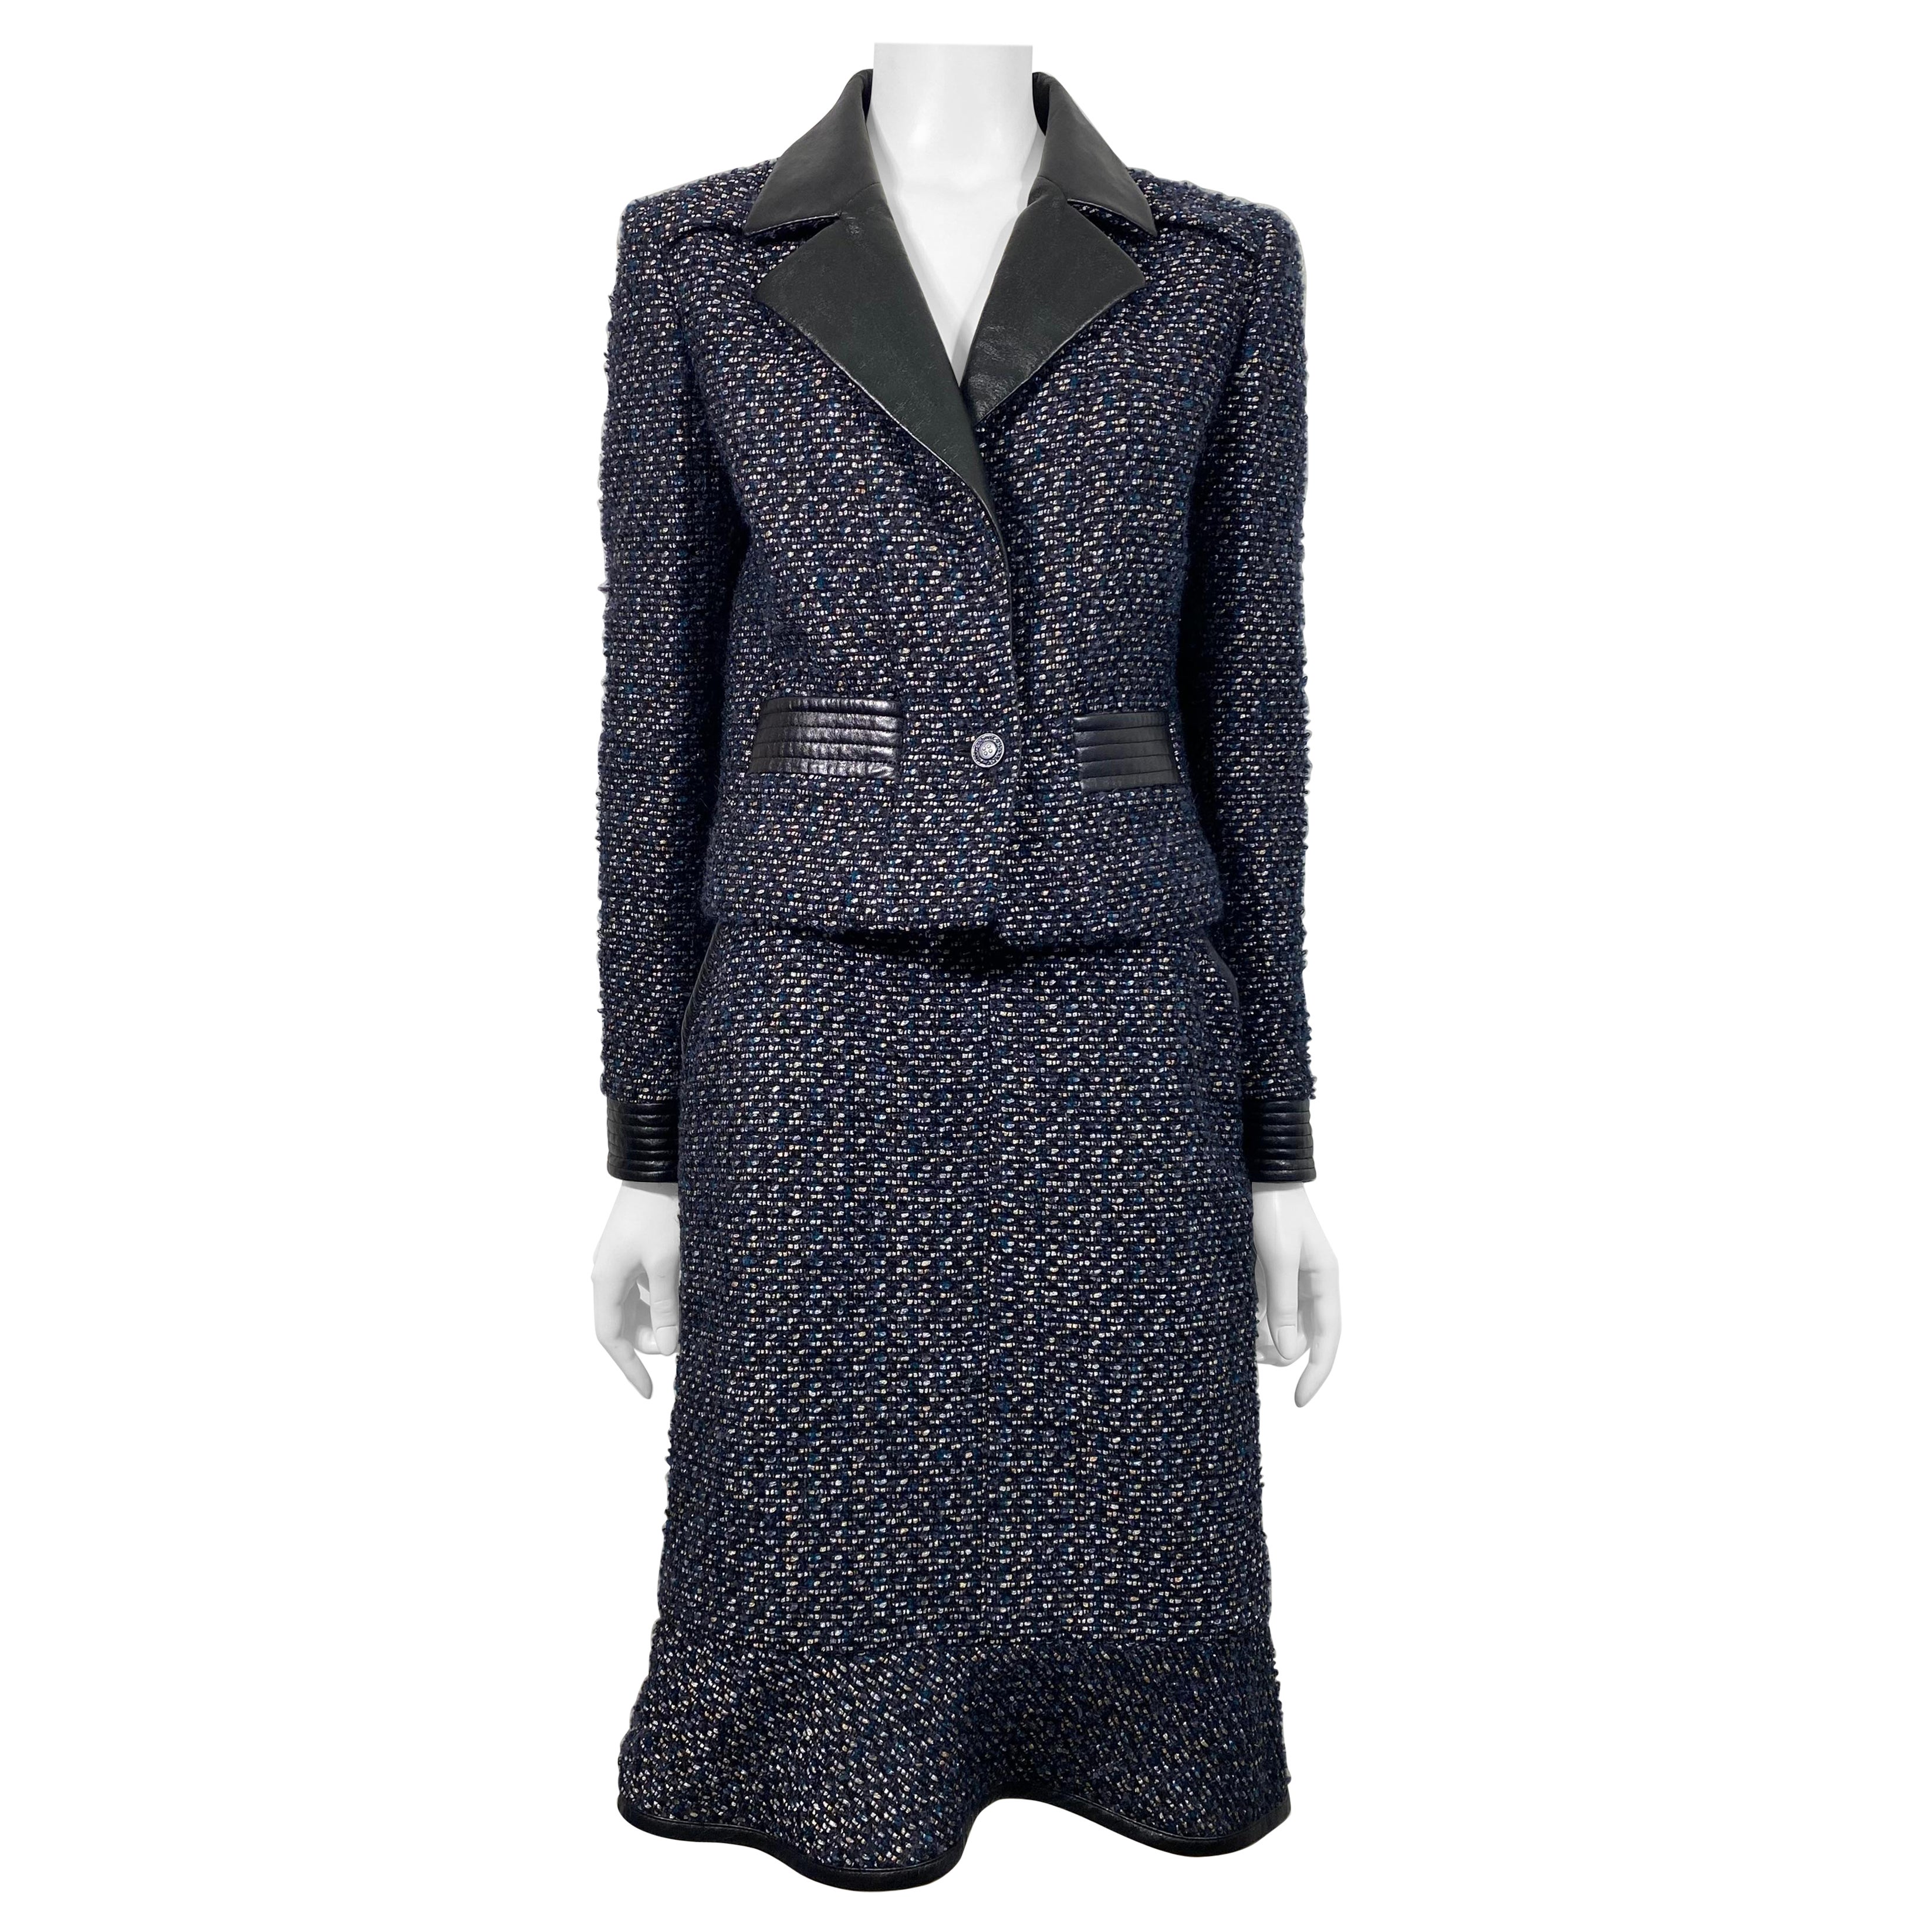 Chanel Runway Fall 2002 Navy Tweed and Black Leather Skirt Suit - Size 40 